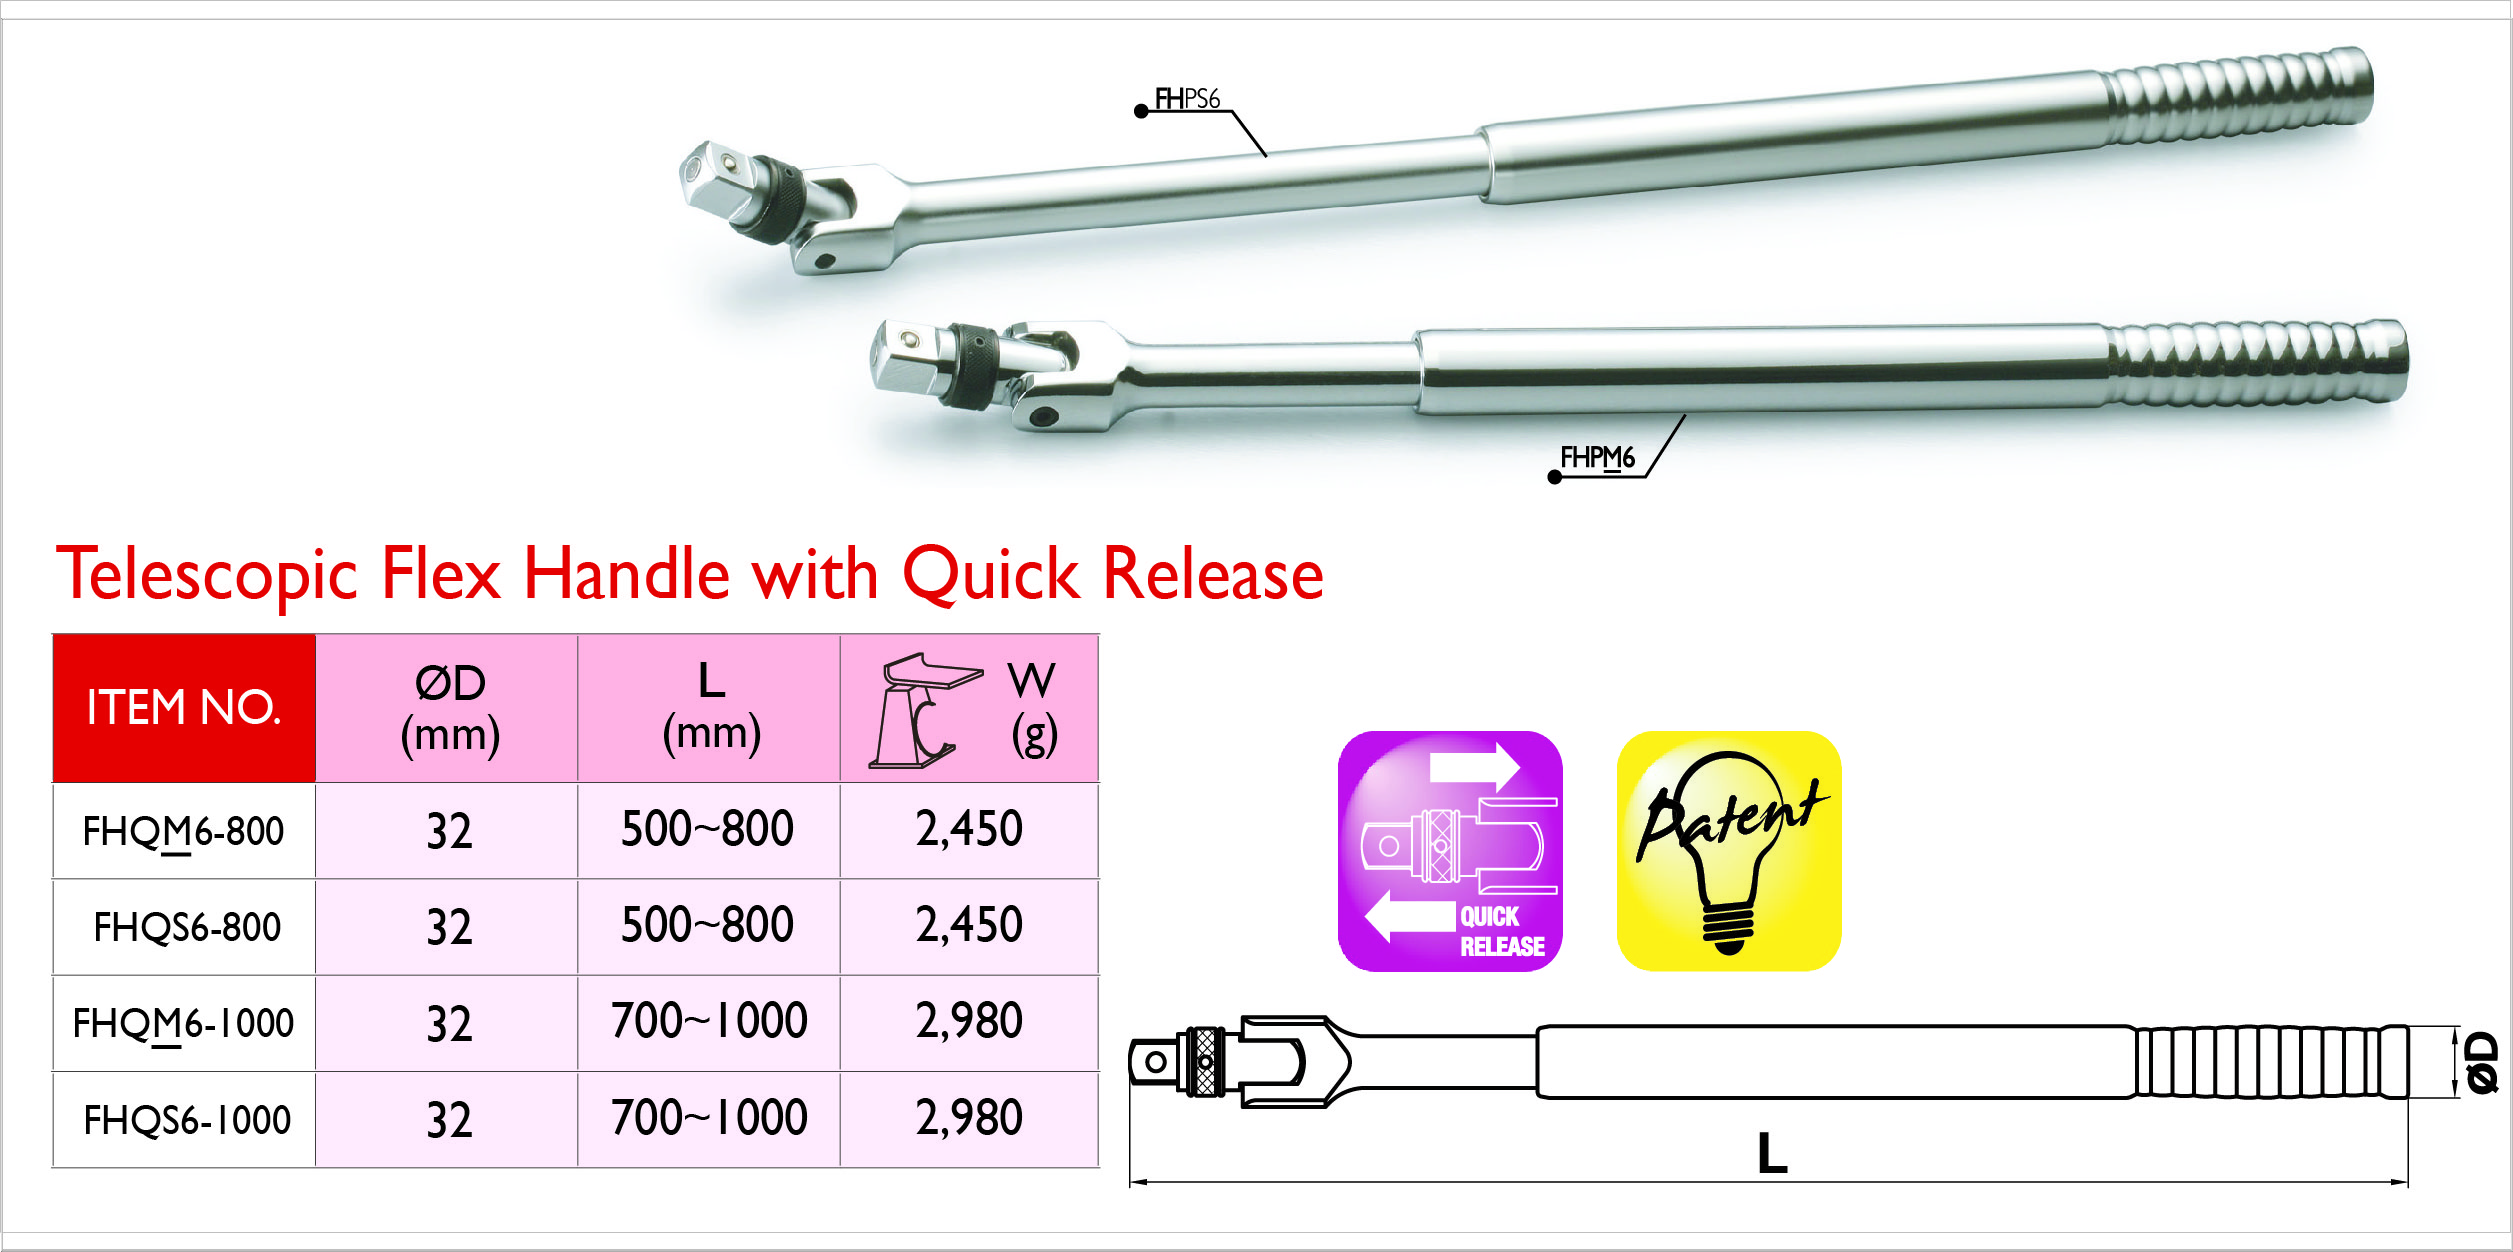 6_34 Telescopic Flex Handle with Quick Release_A.jpg